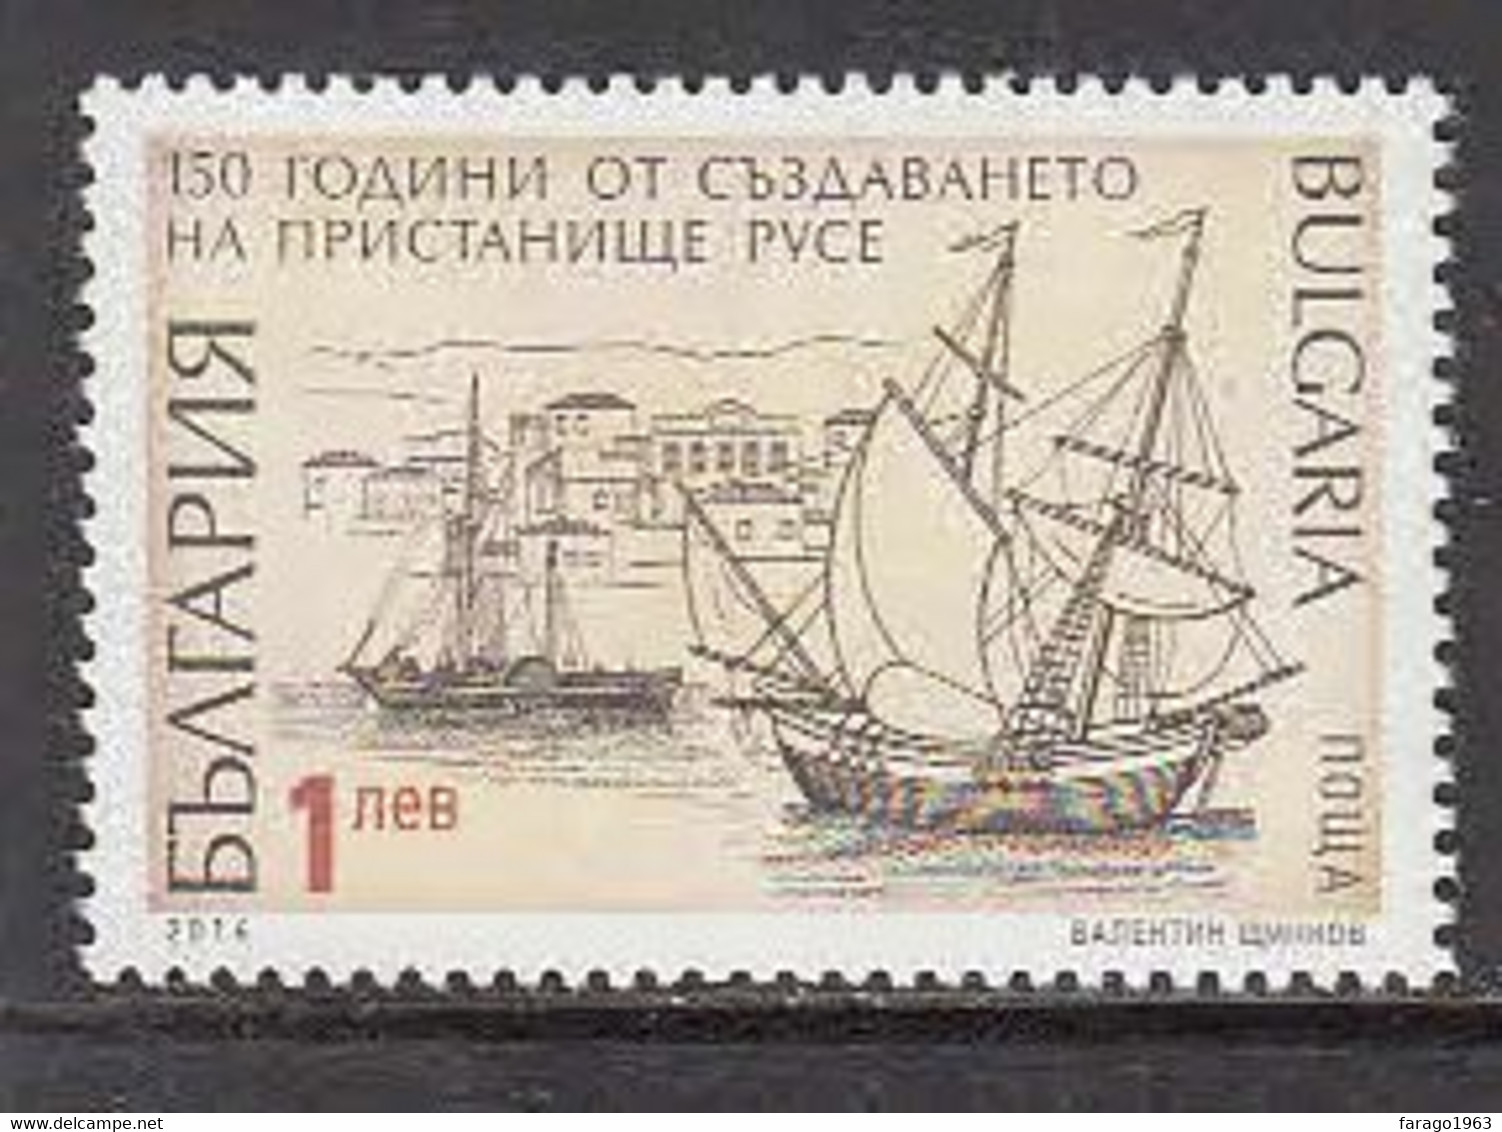 2016 Bulgaria Port Of Ruse Ships  Complete Set Of 1 MNH - Ungebraucht